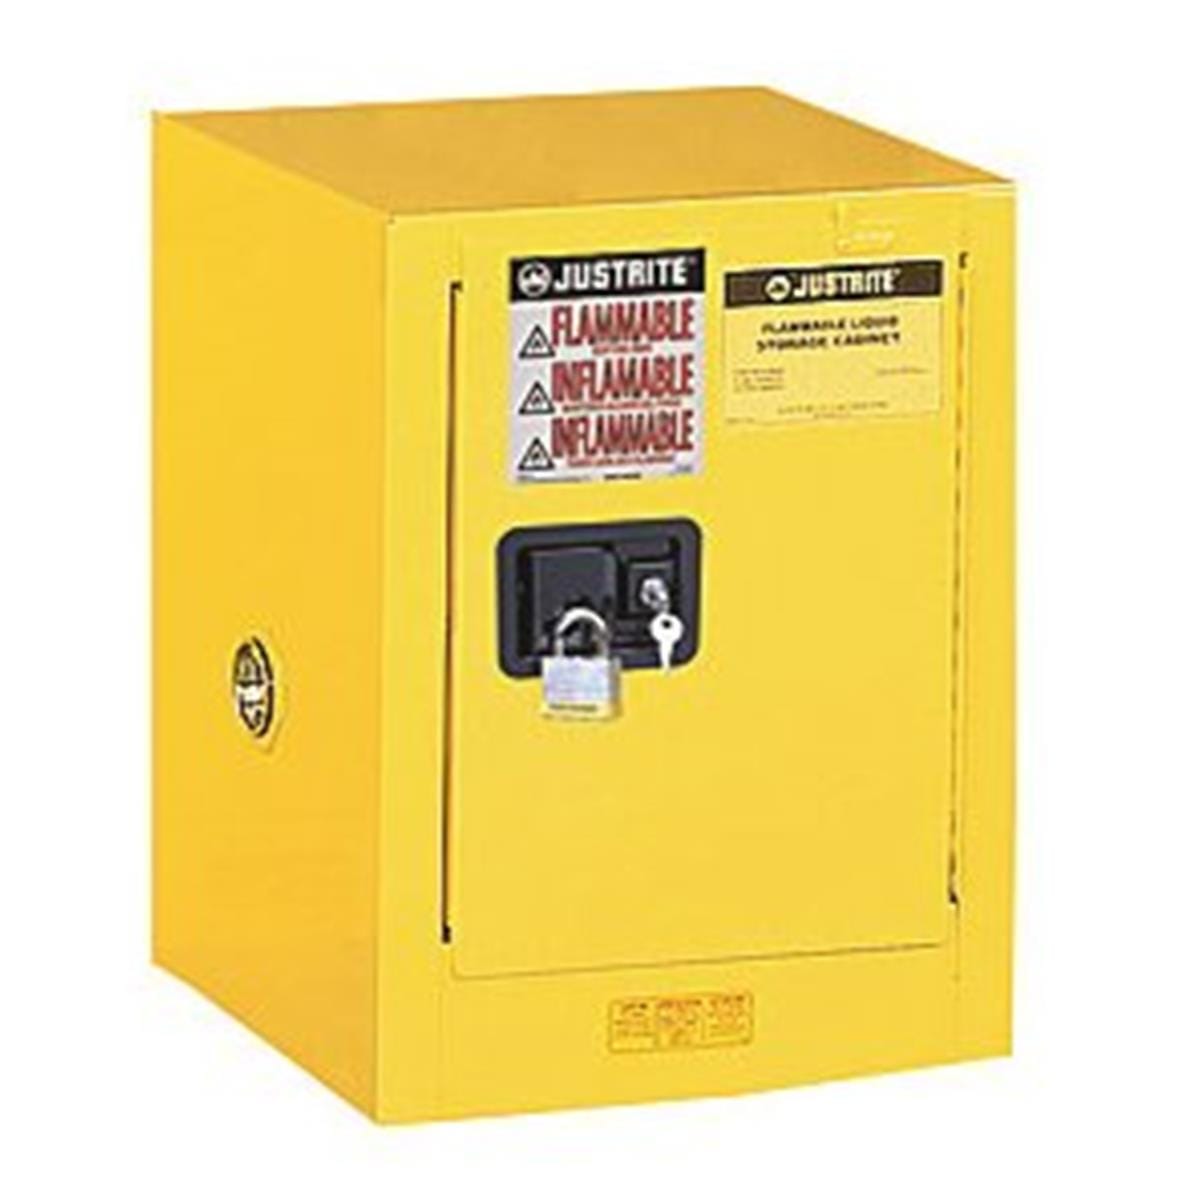 Justrite 12-gal. Flammable Liquid Safety Cabinet